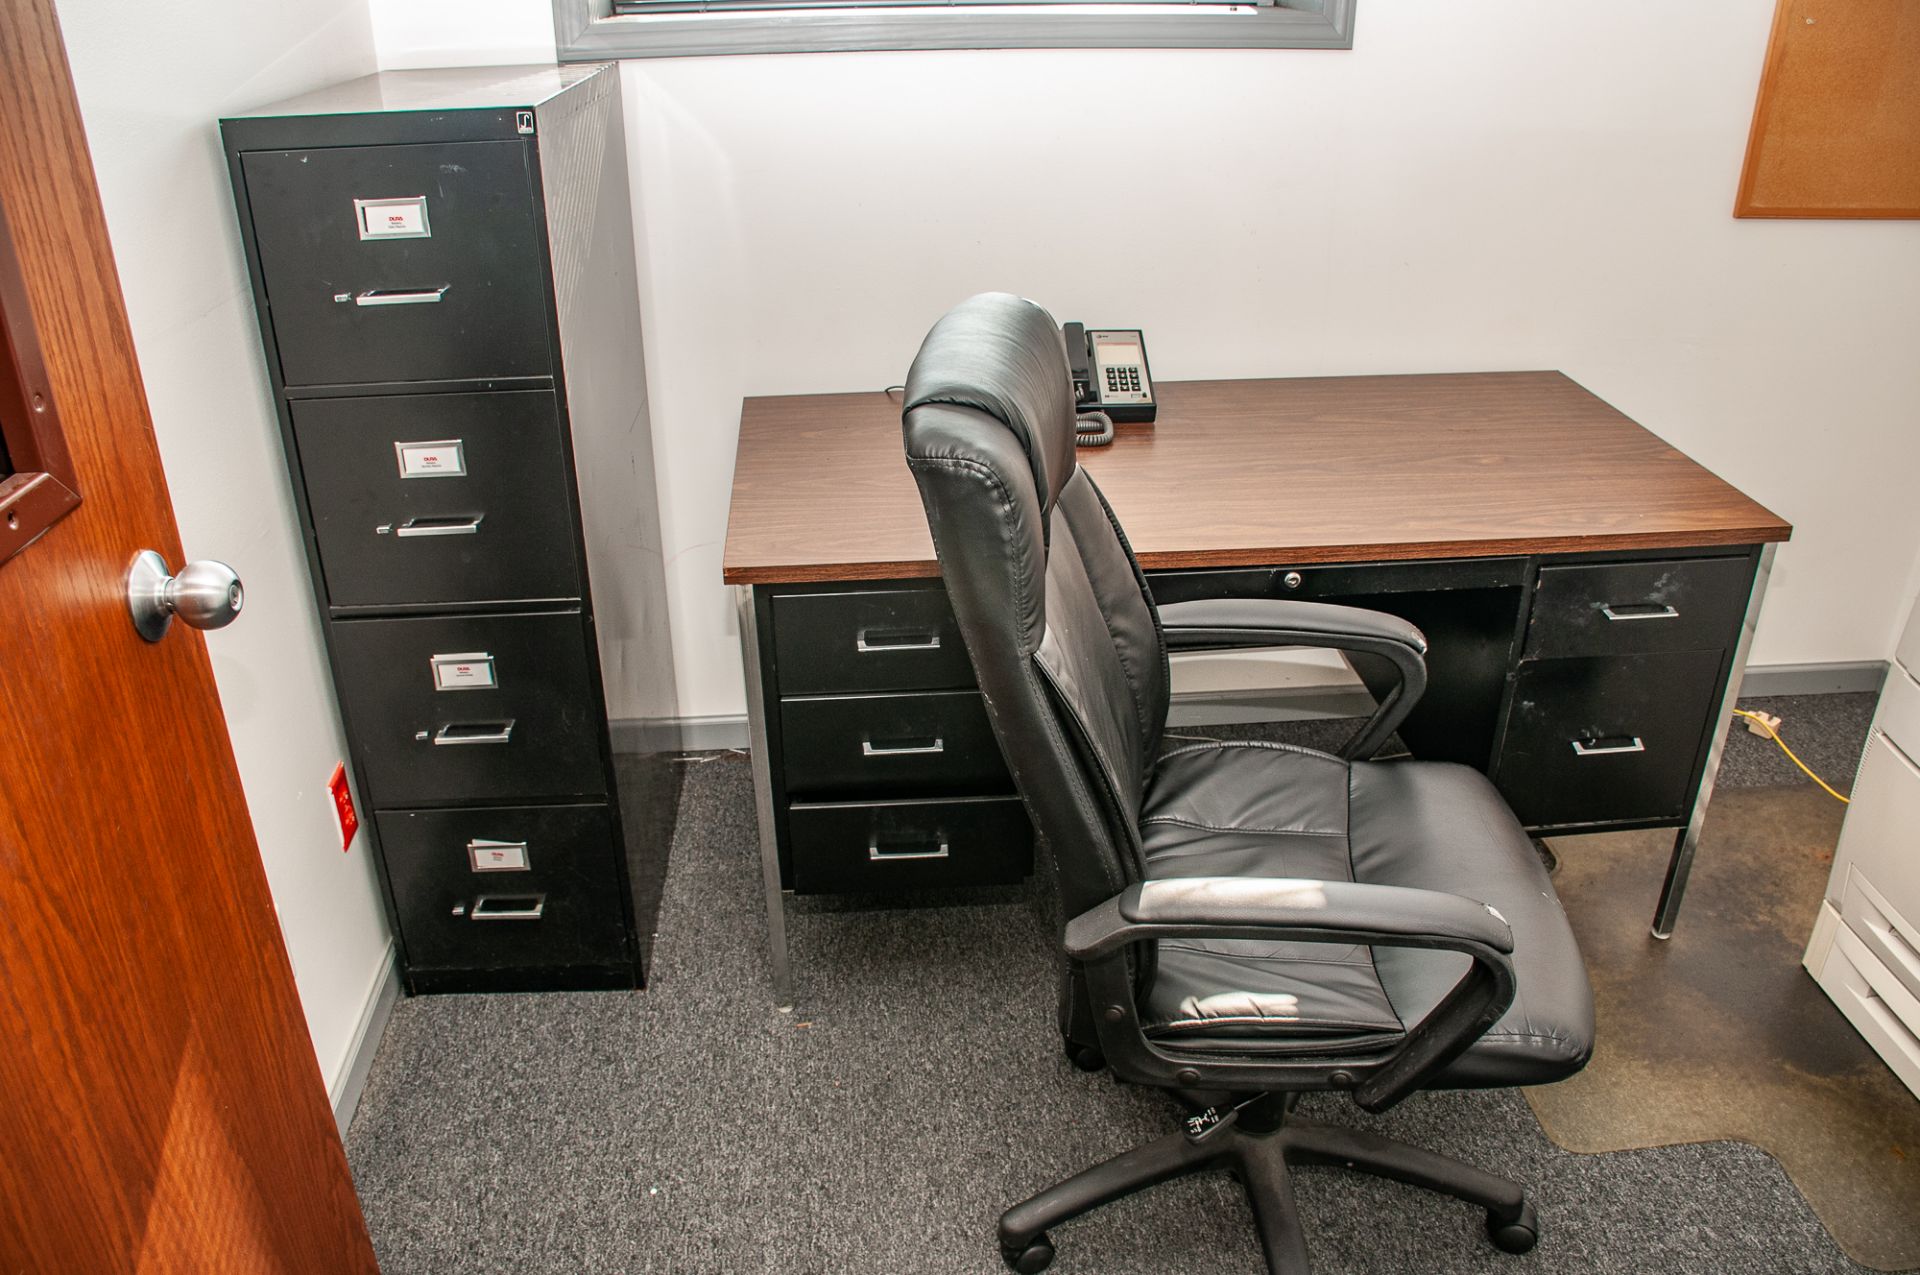 Office Furniture On Second Floor Front of Building, Microwave, Refridgerator, Desks Chairs, Filing C - Image 11 of 37